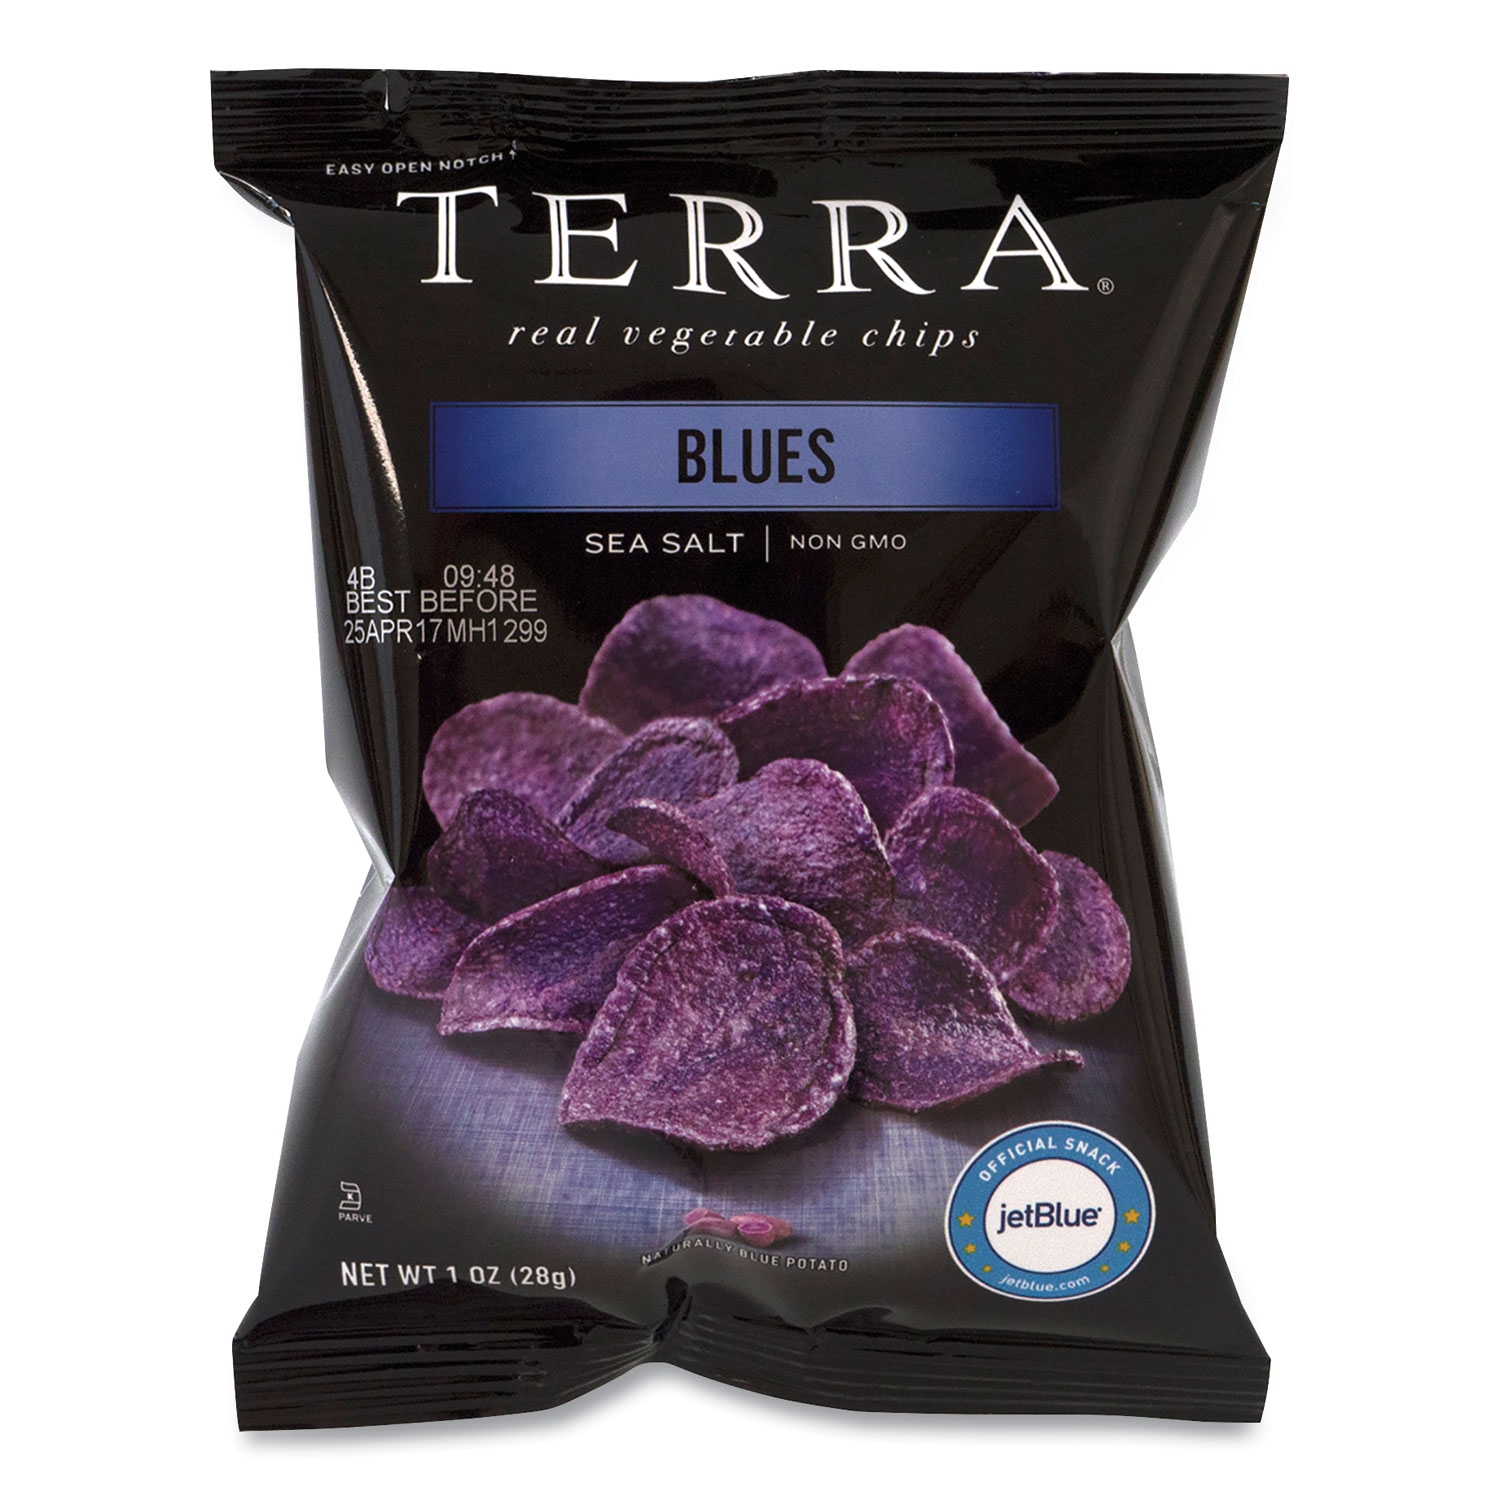  TERRA 880781 Real Vegetable Chips Blue, 1 oz Bag, 24 Bags/Box, Free Delivery in 1-4 Business Days (GRR20902474) 